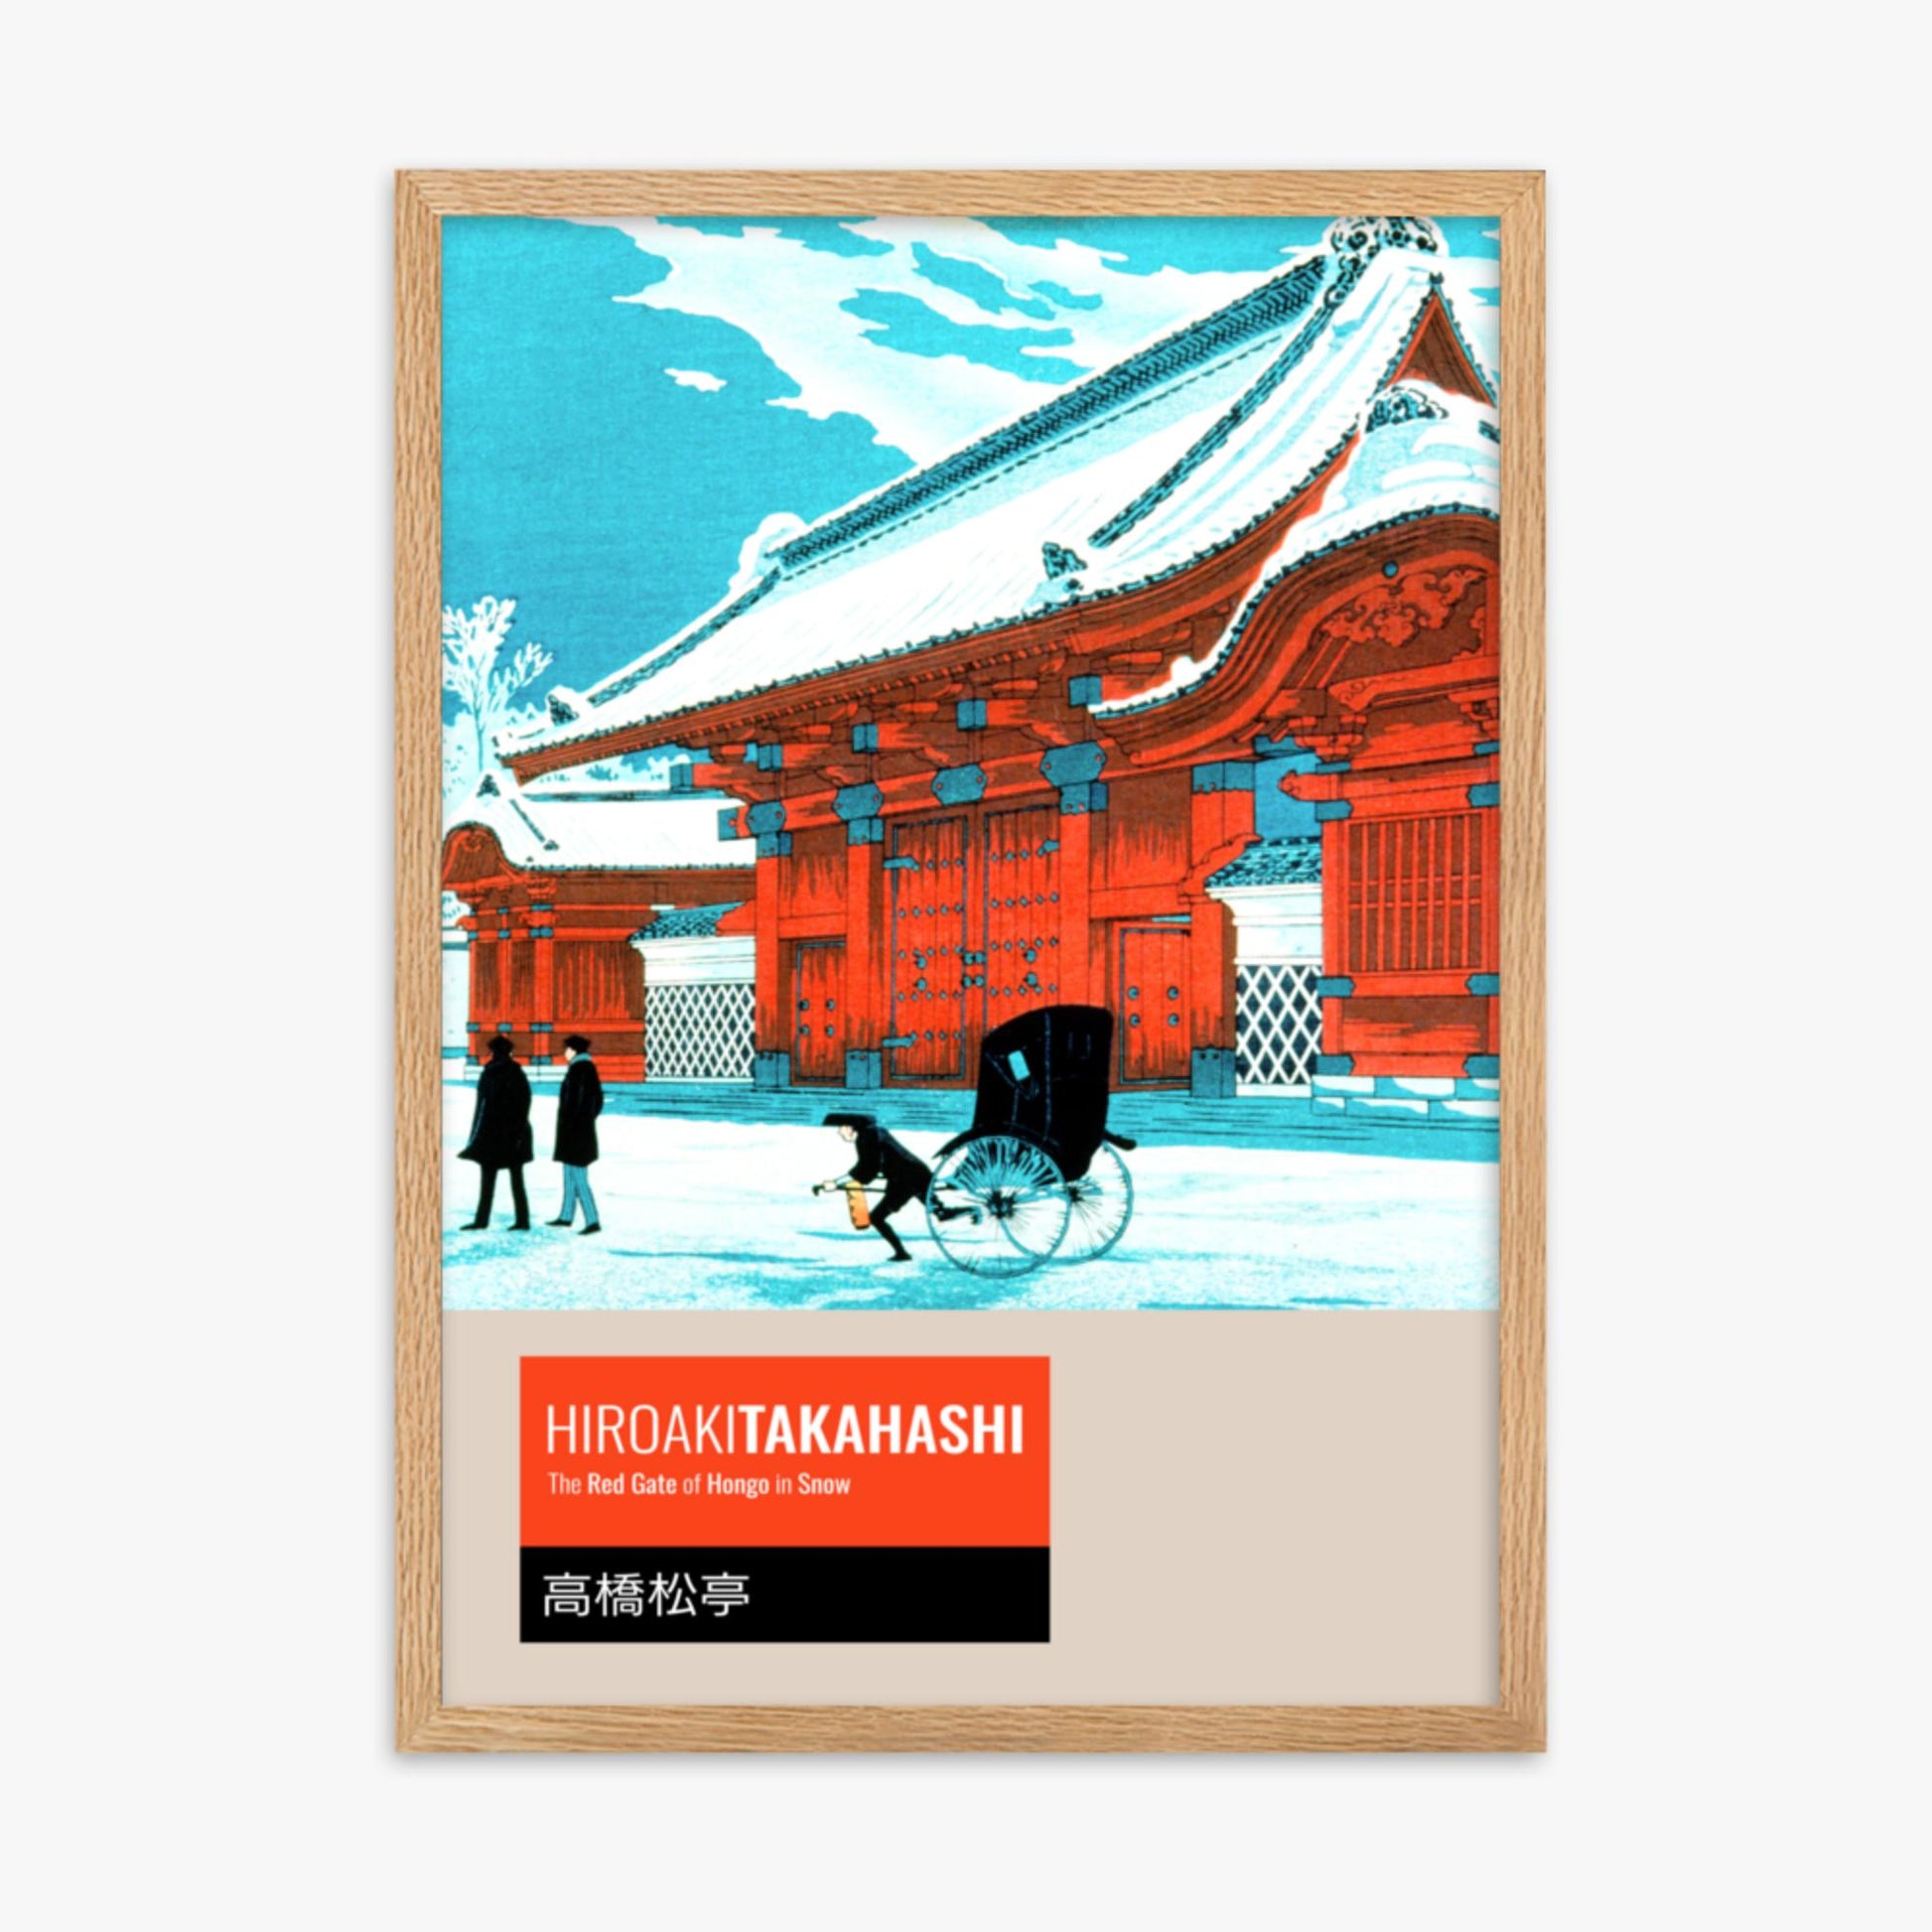 Takahashi Hiroaki (Shōtei) - The Red Gate of Hongo in Snow - Decoration 50x70 cm Poster With Oak Frame